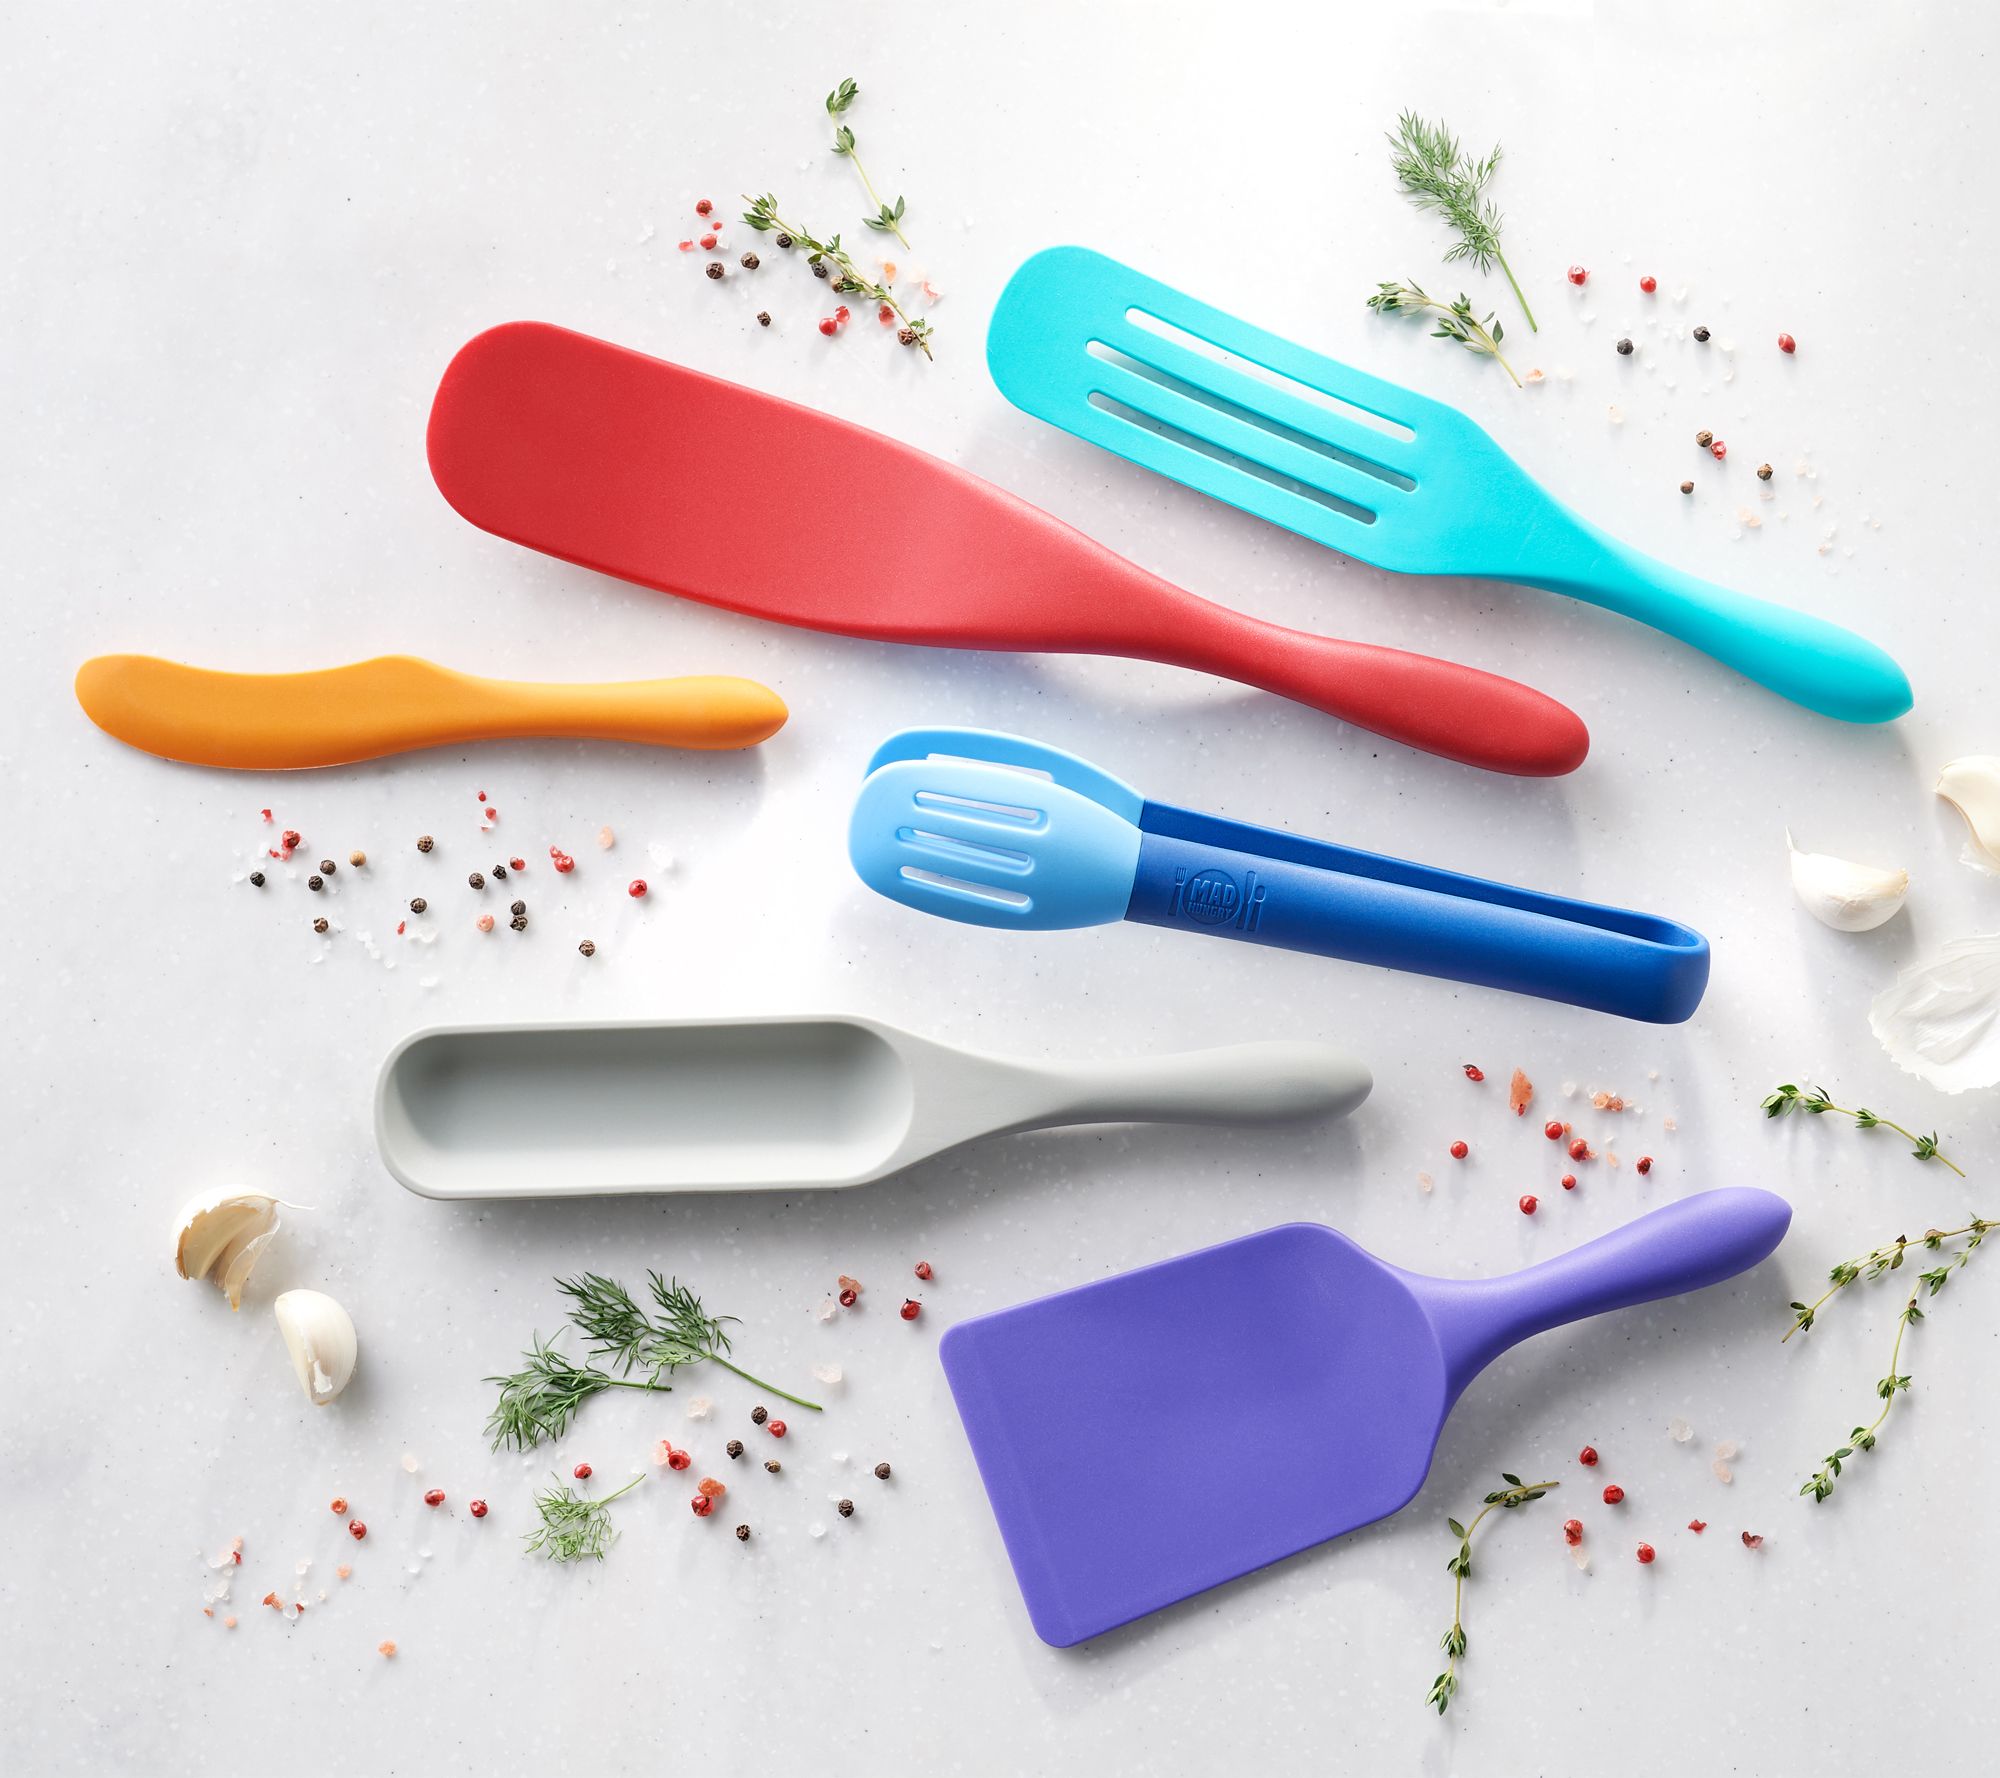 Mad Hungry 4-Piece Silicone Spurtle Set by Kalorik